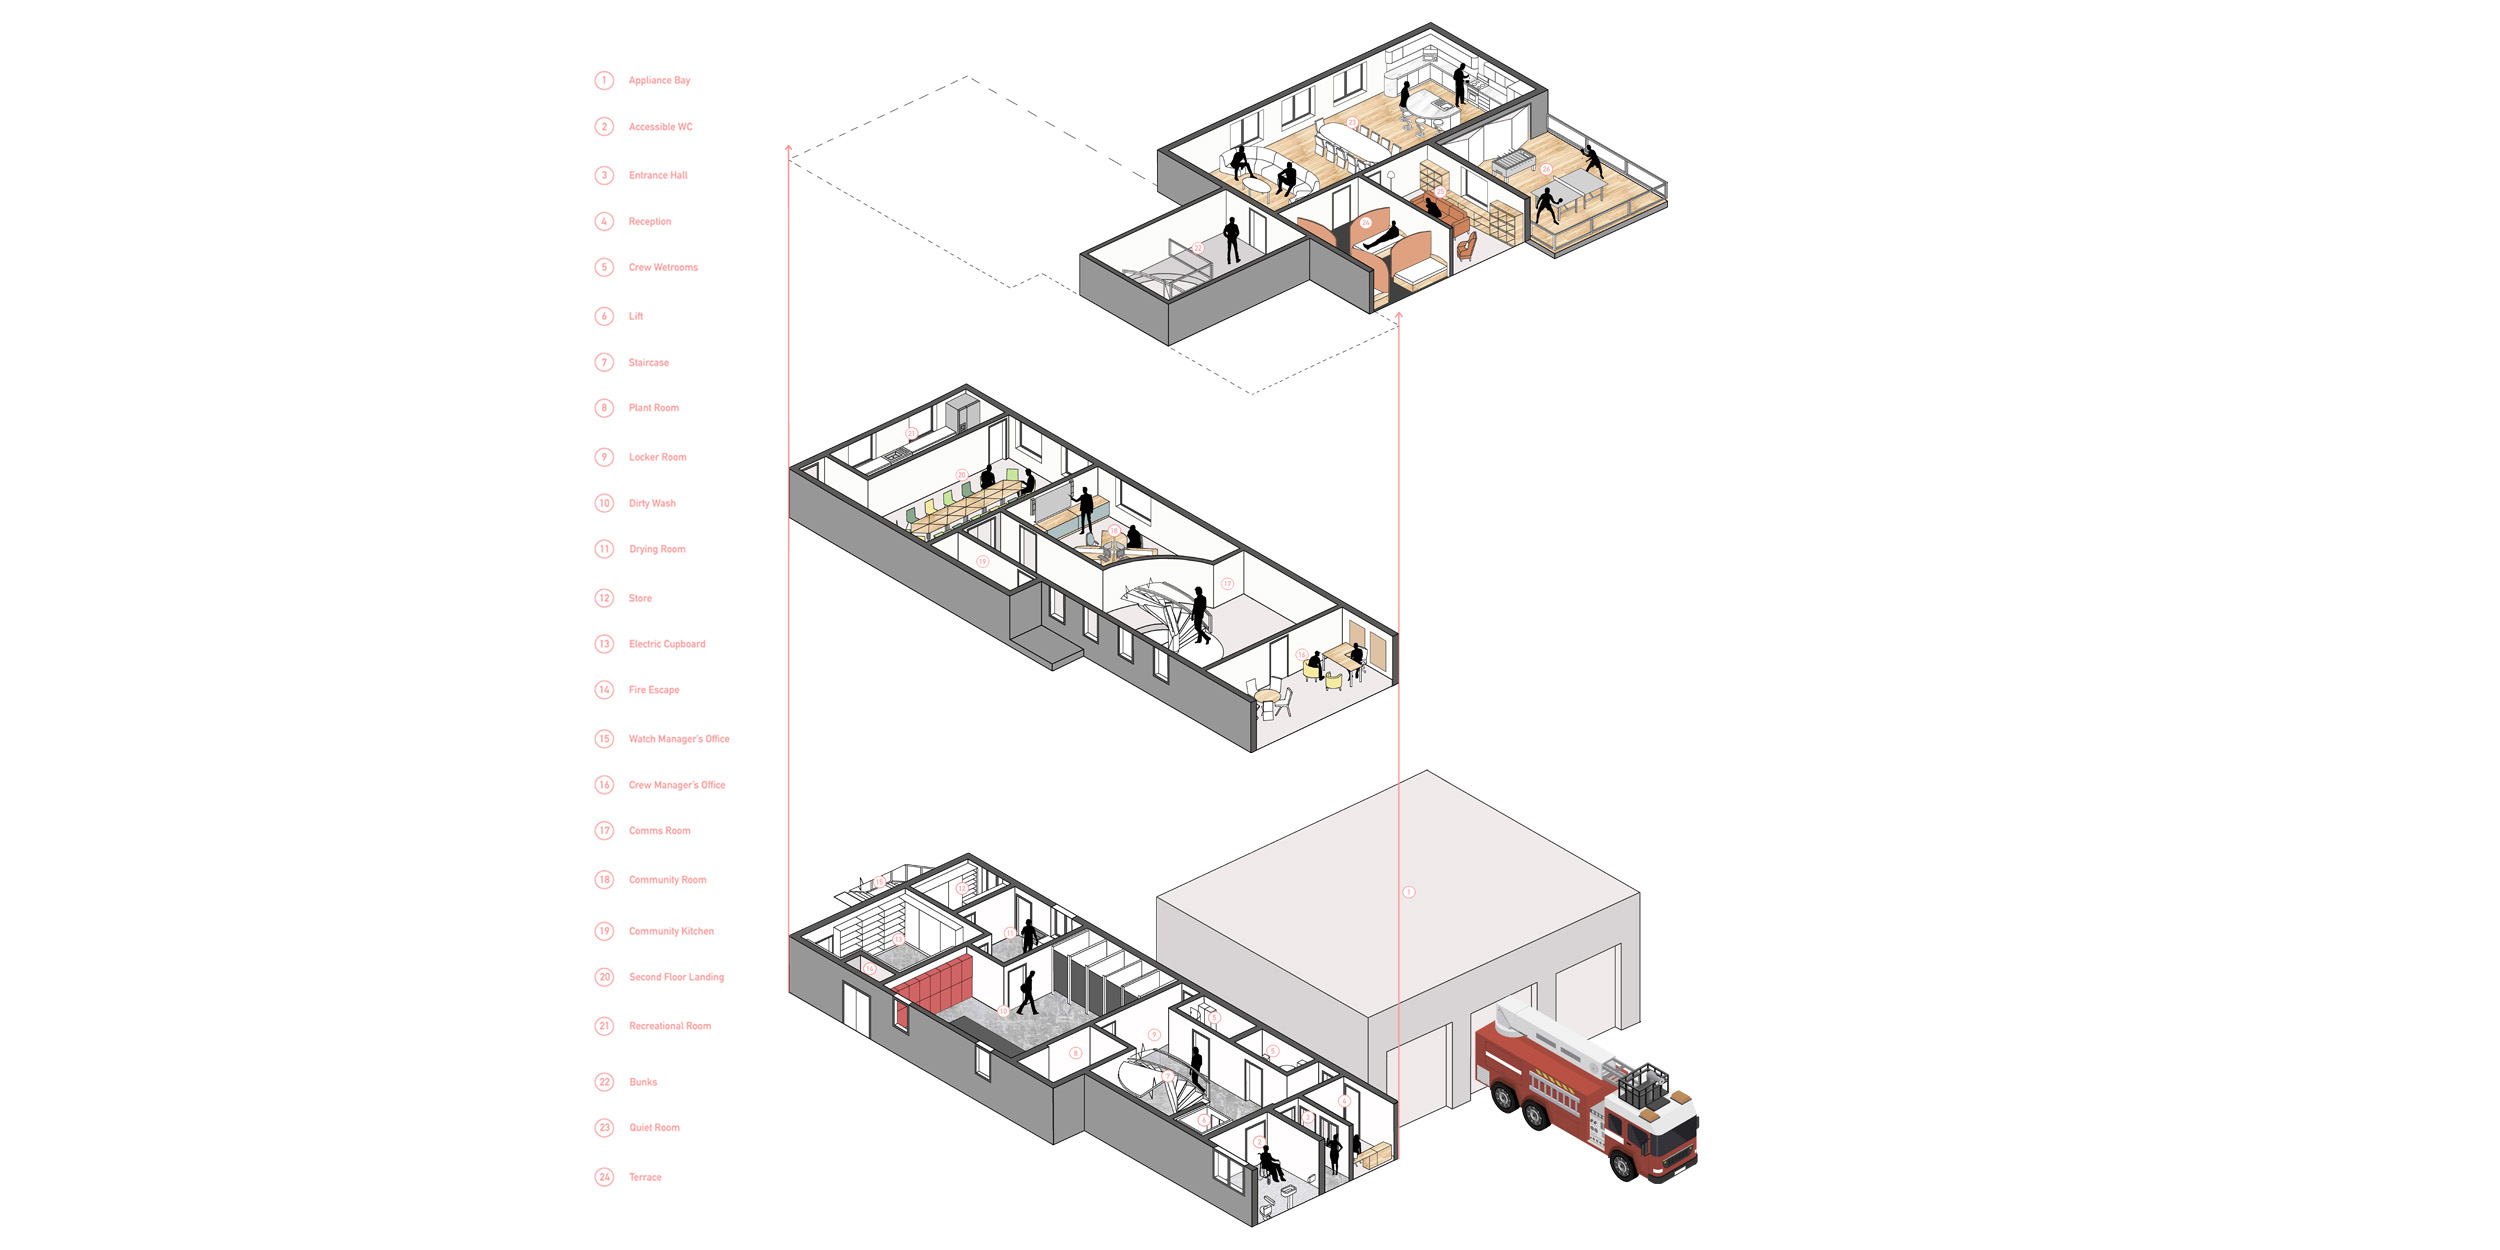 The isometric drawing is the best way to highlight this scheme all in one visual. It highlights all three floors and their distinctive characteristics as well as the staircase that links them together.